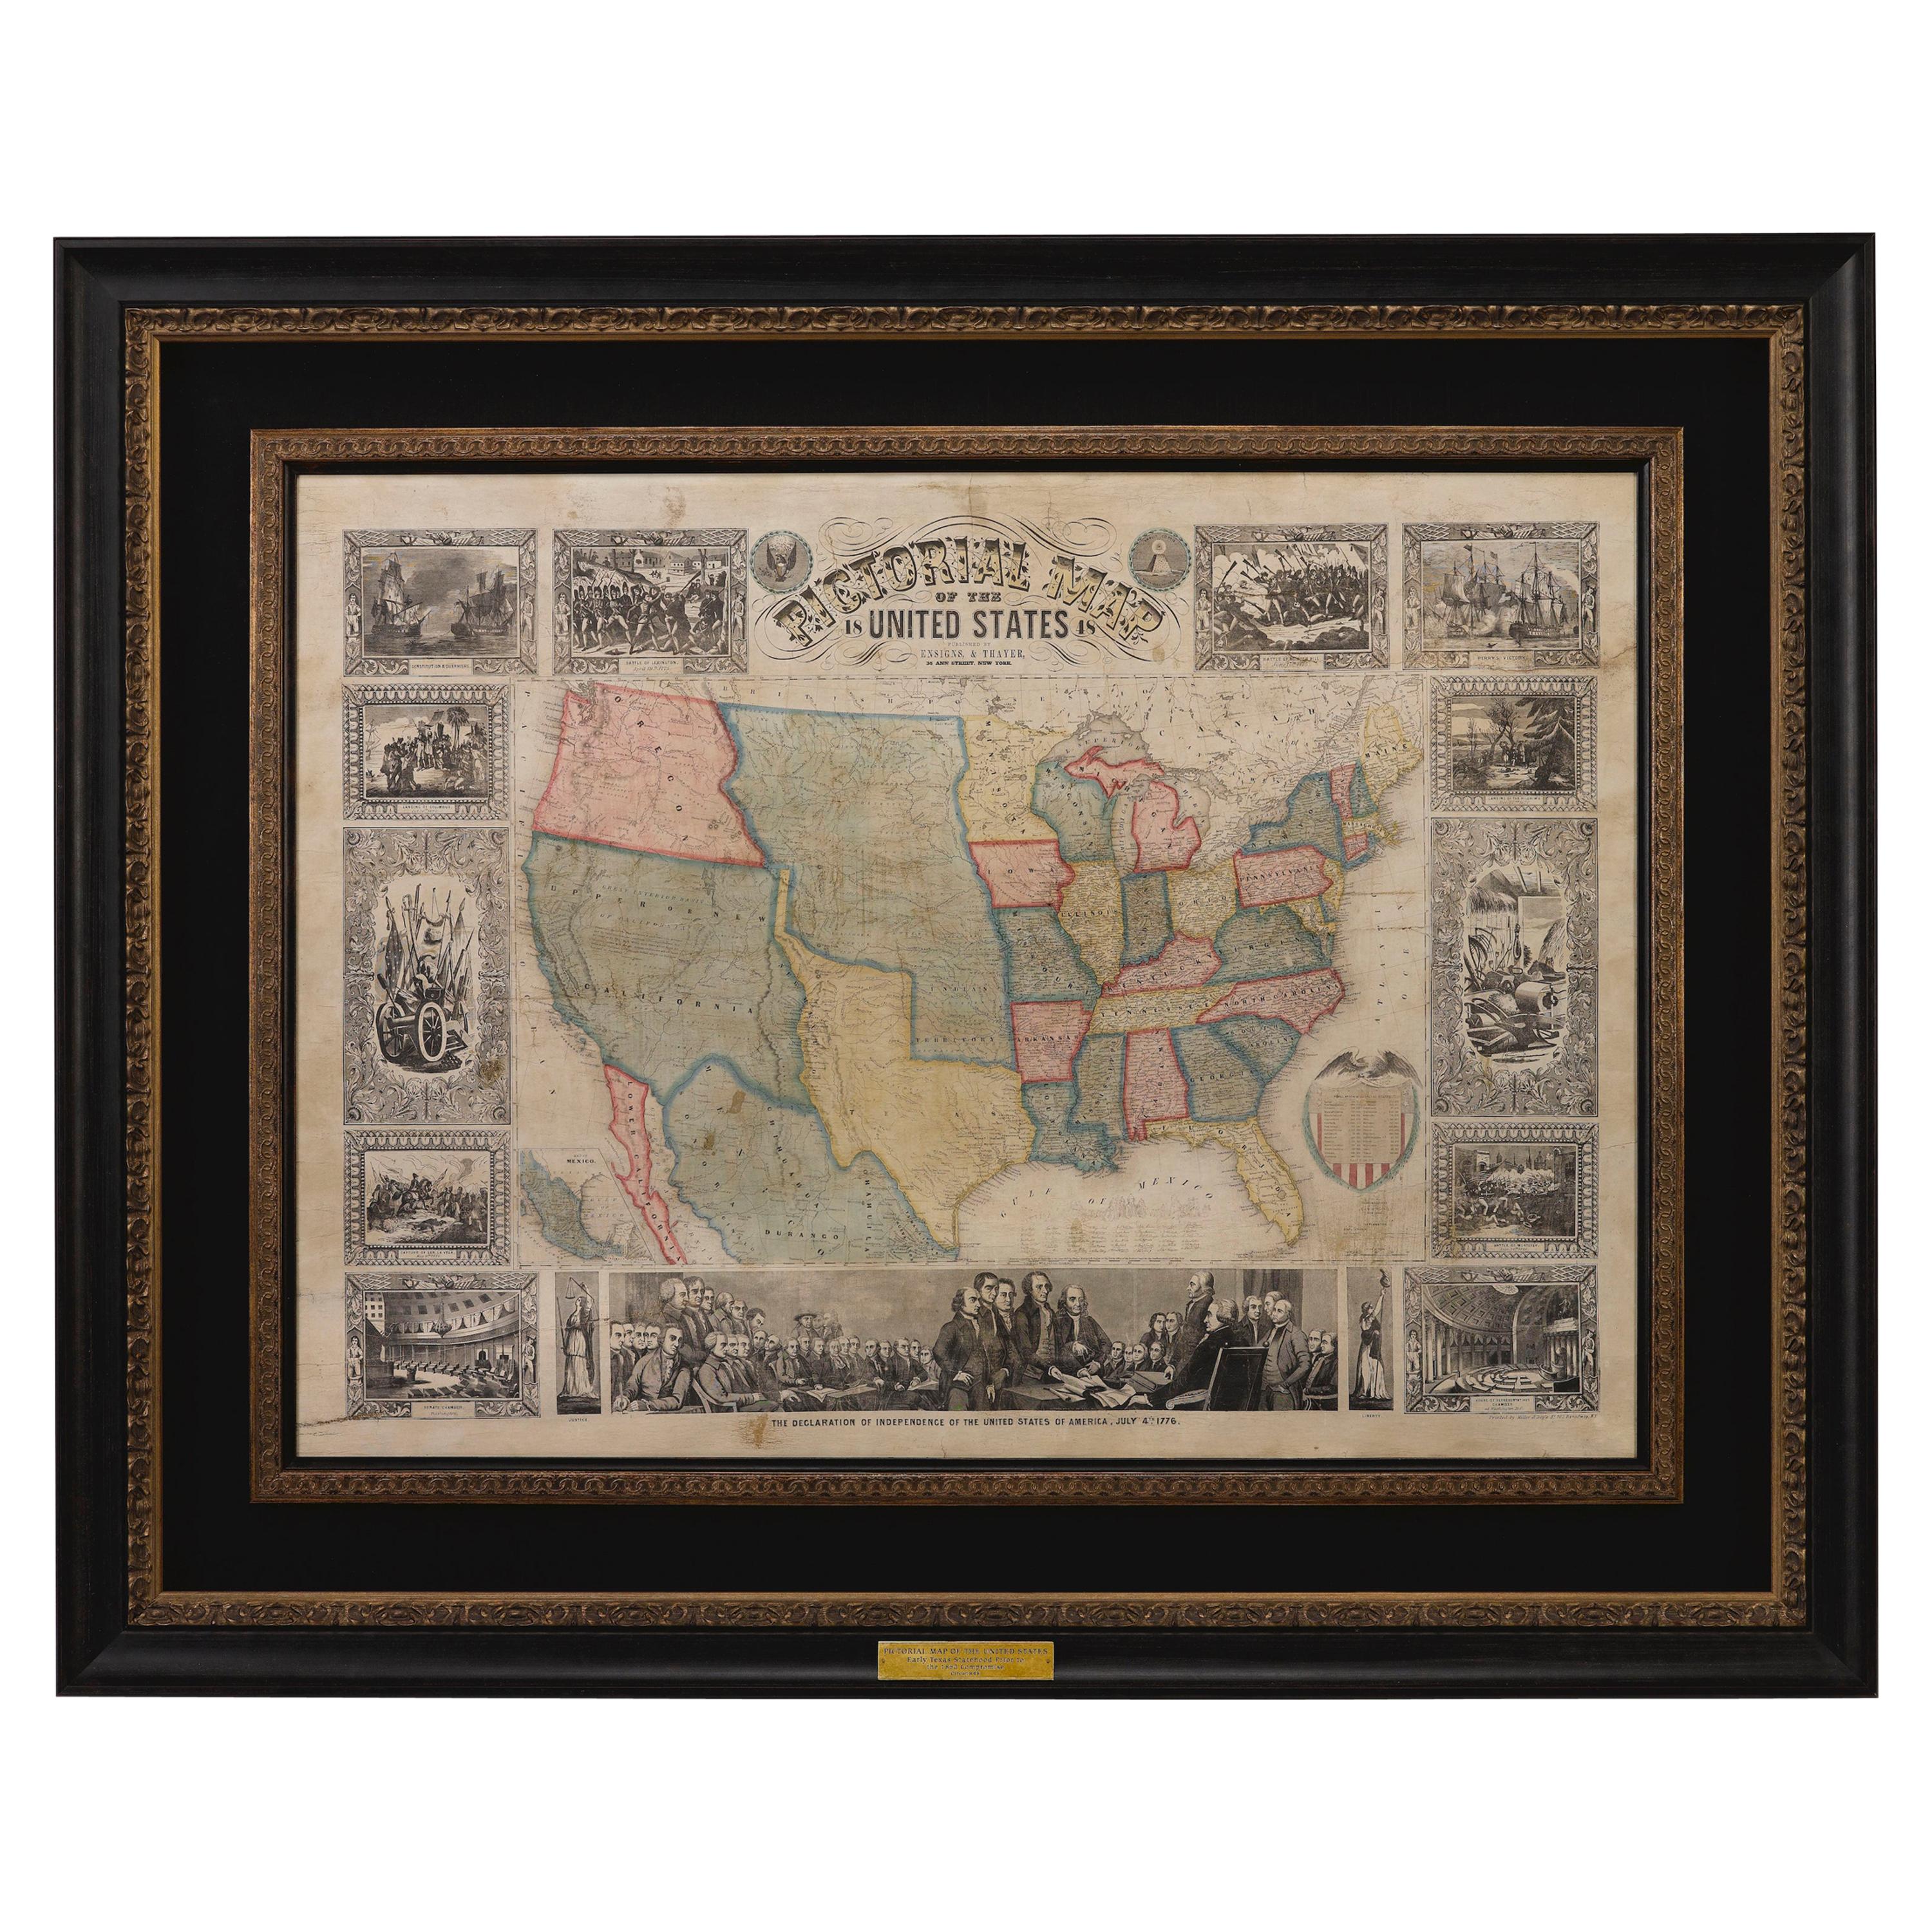 1848 "Pictorial Map of the United States" by Ensign & Thayer